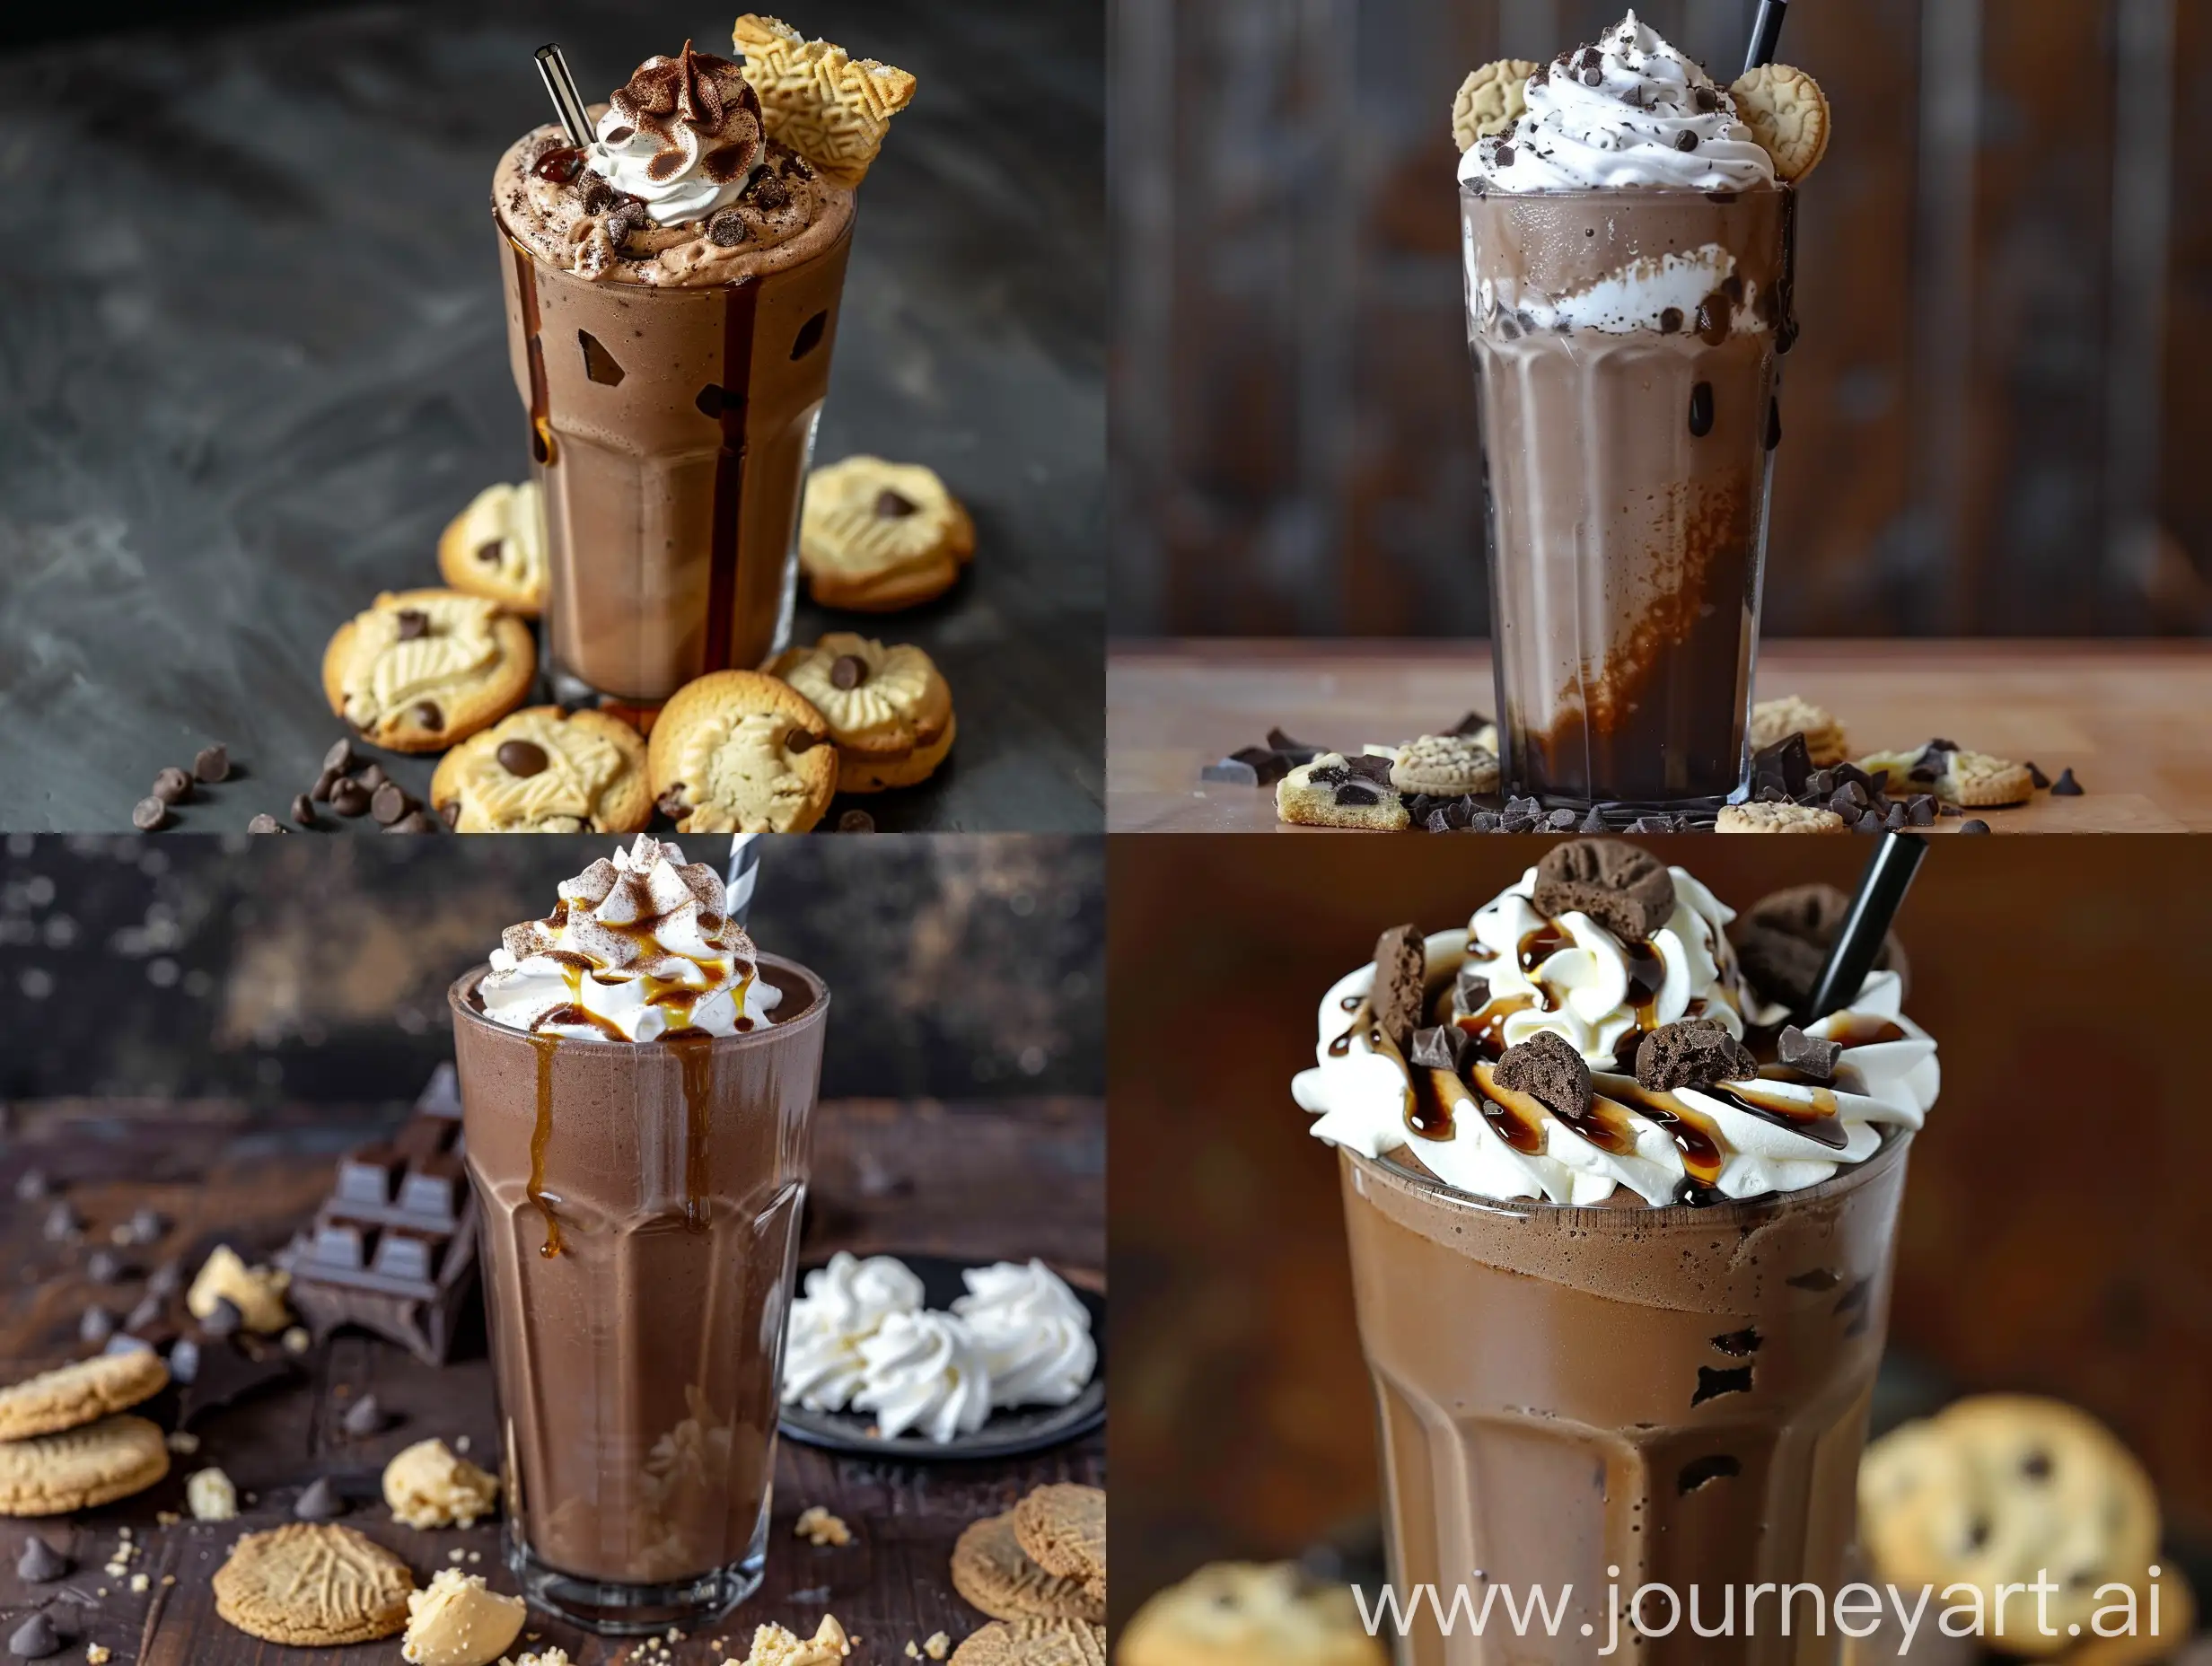 Chocolate frappe with whipped cream, syrup and cookies